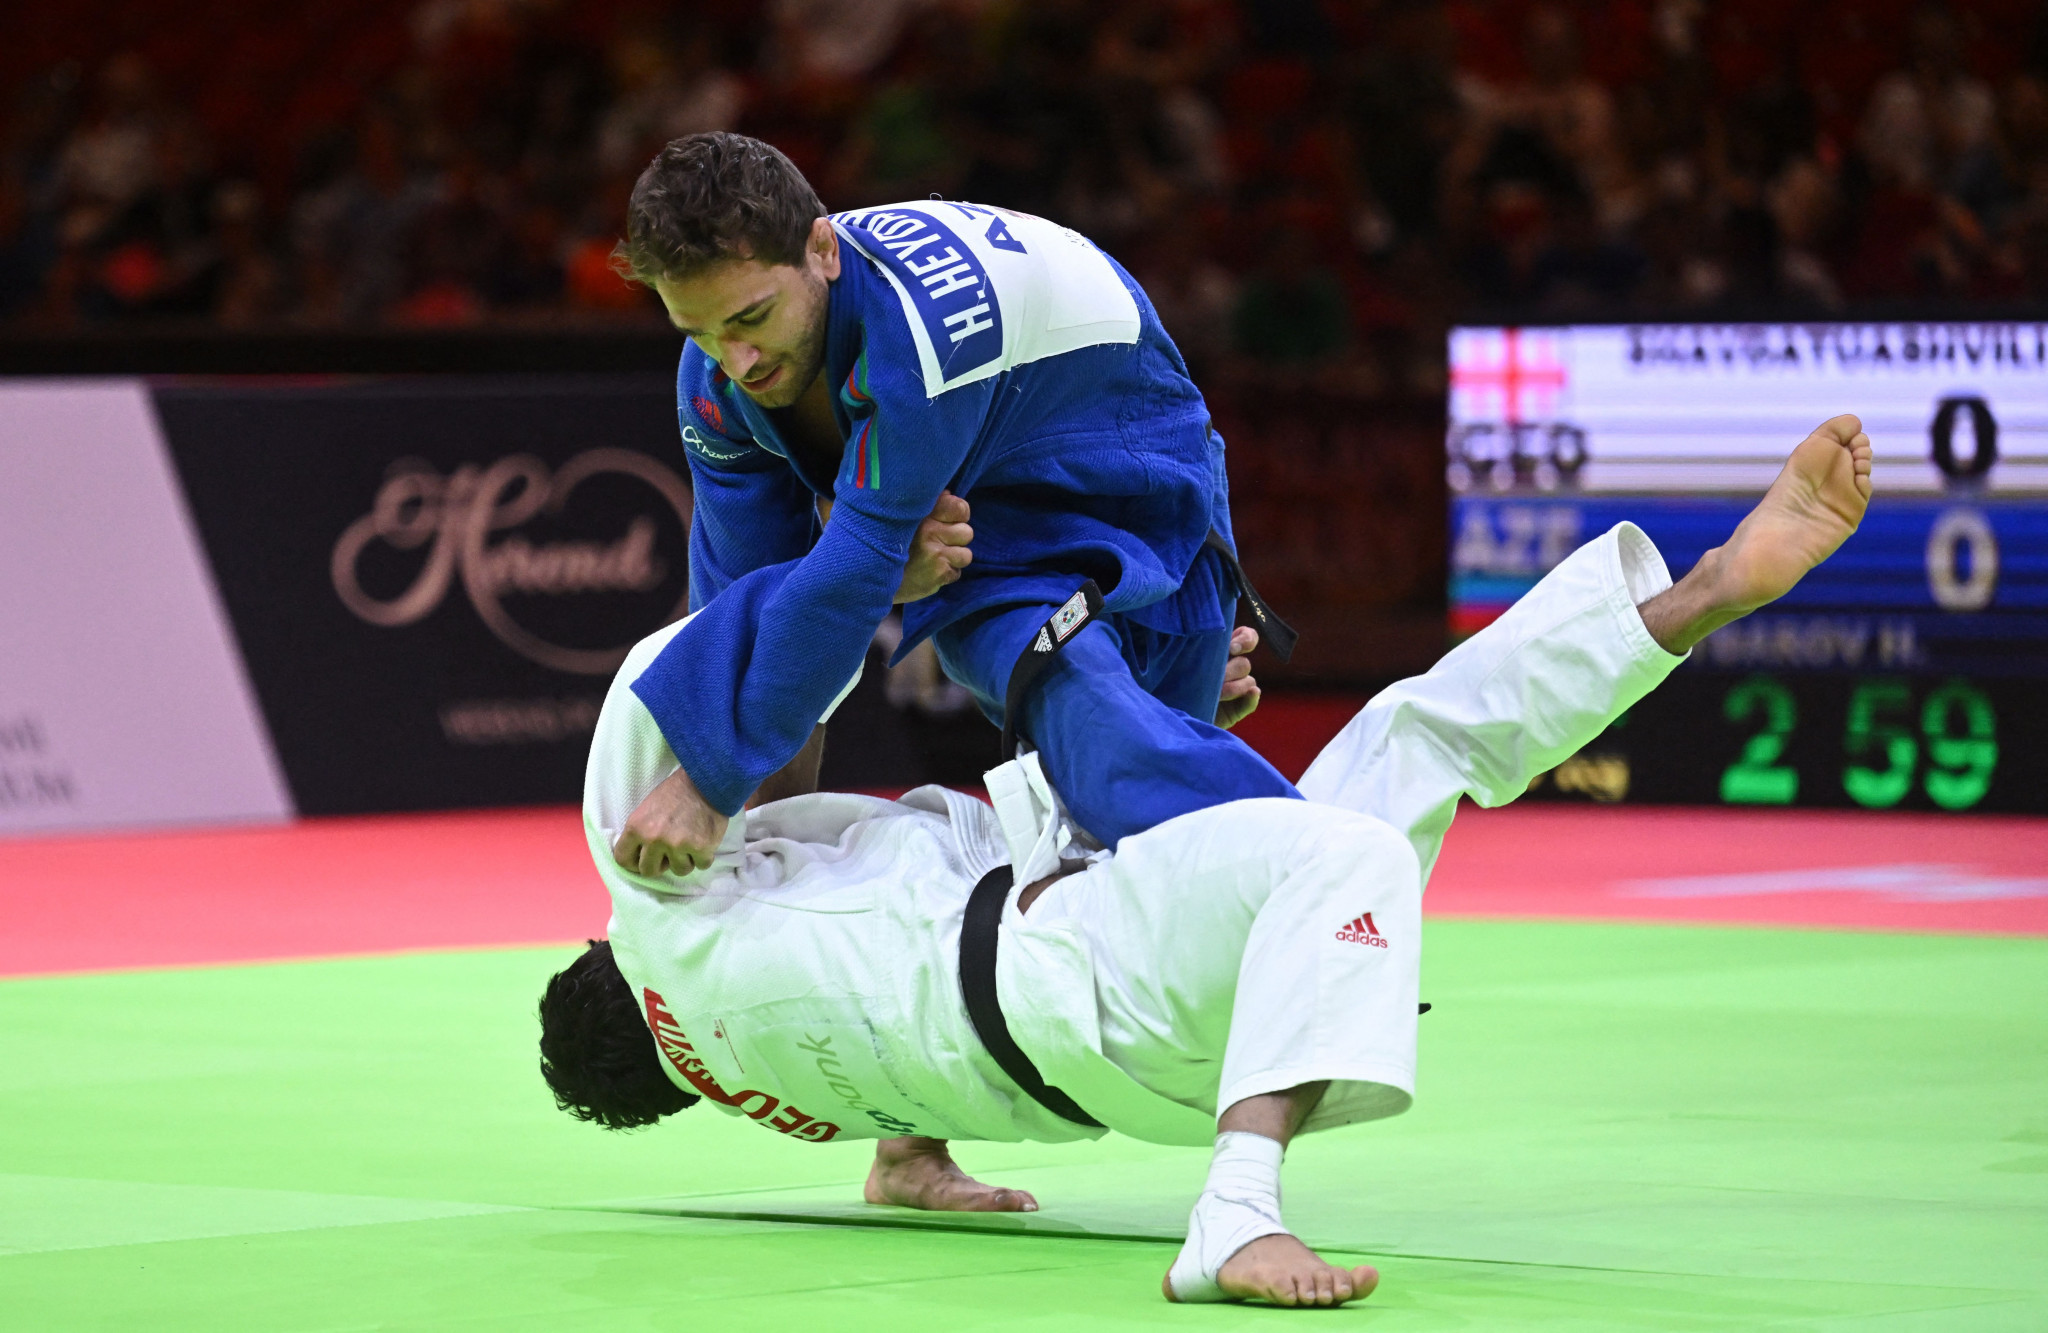 Hidayat Heydarov, top, won gold in the men's under-73 kilograms category at the IJF Grand Slam in Budapest ©Getty Images